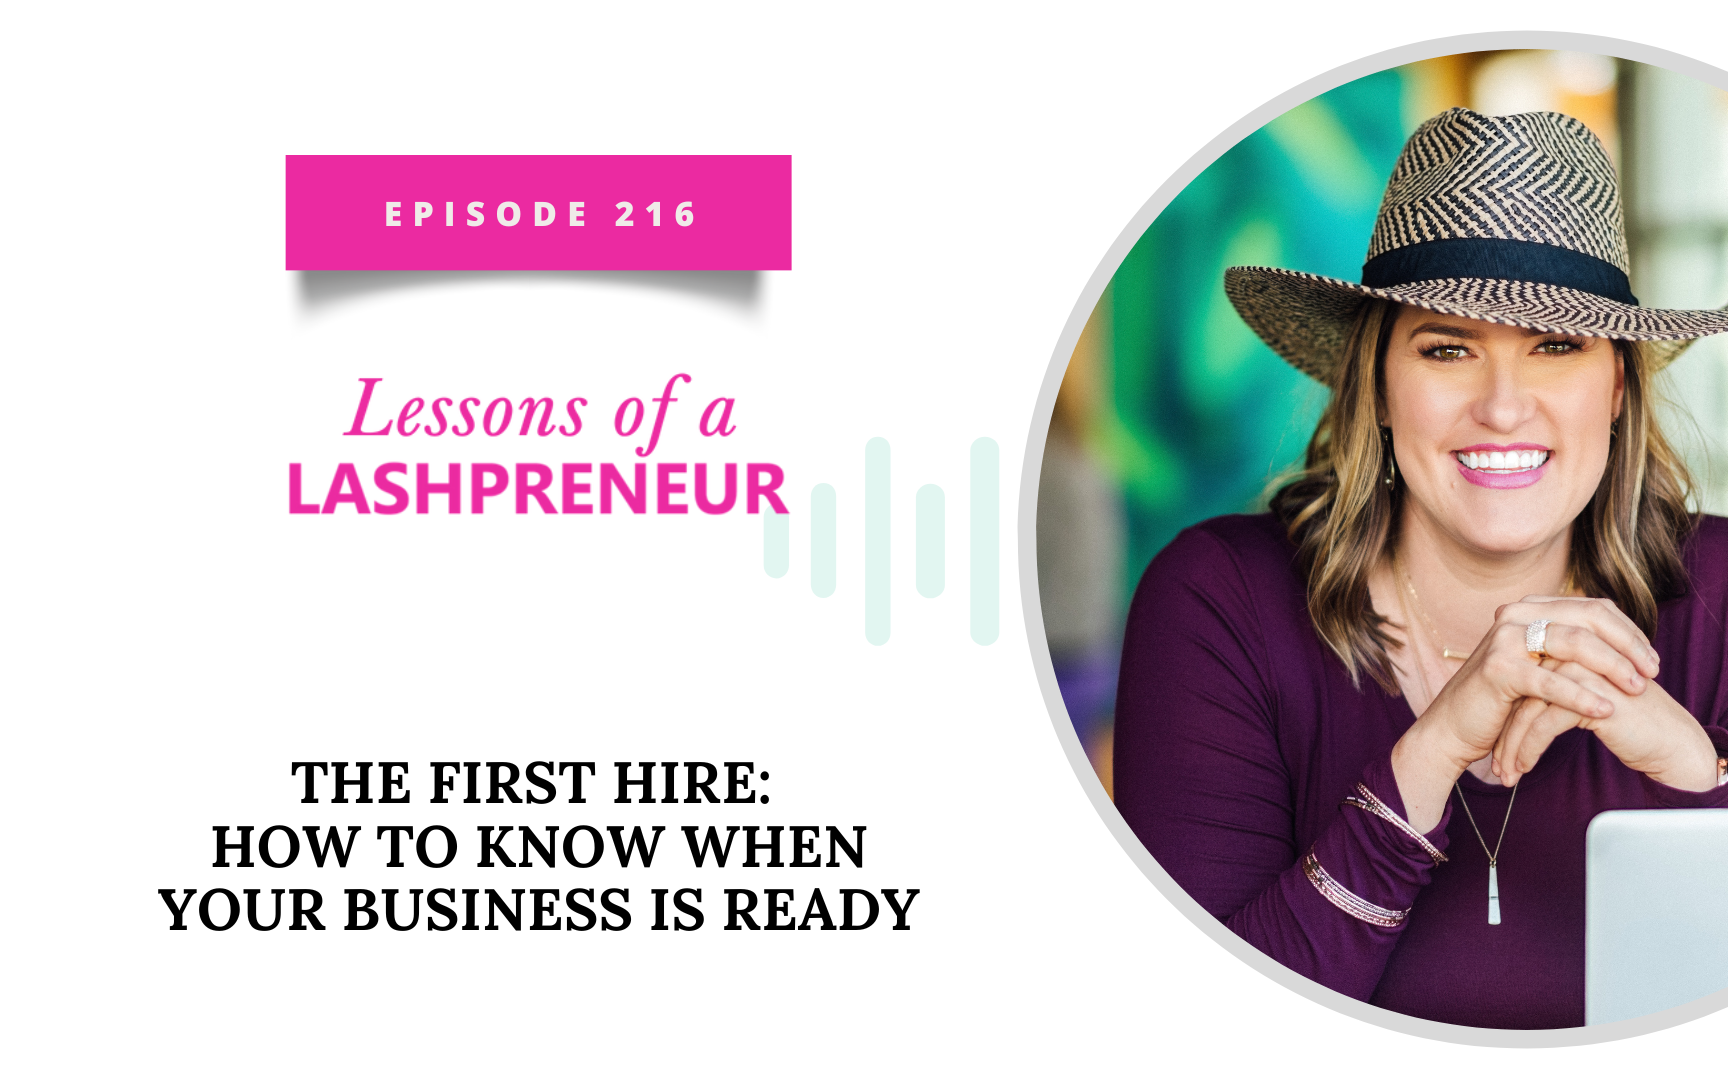 The First Hire: How to Know When Your Business is Ready